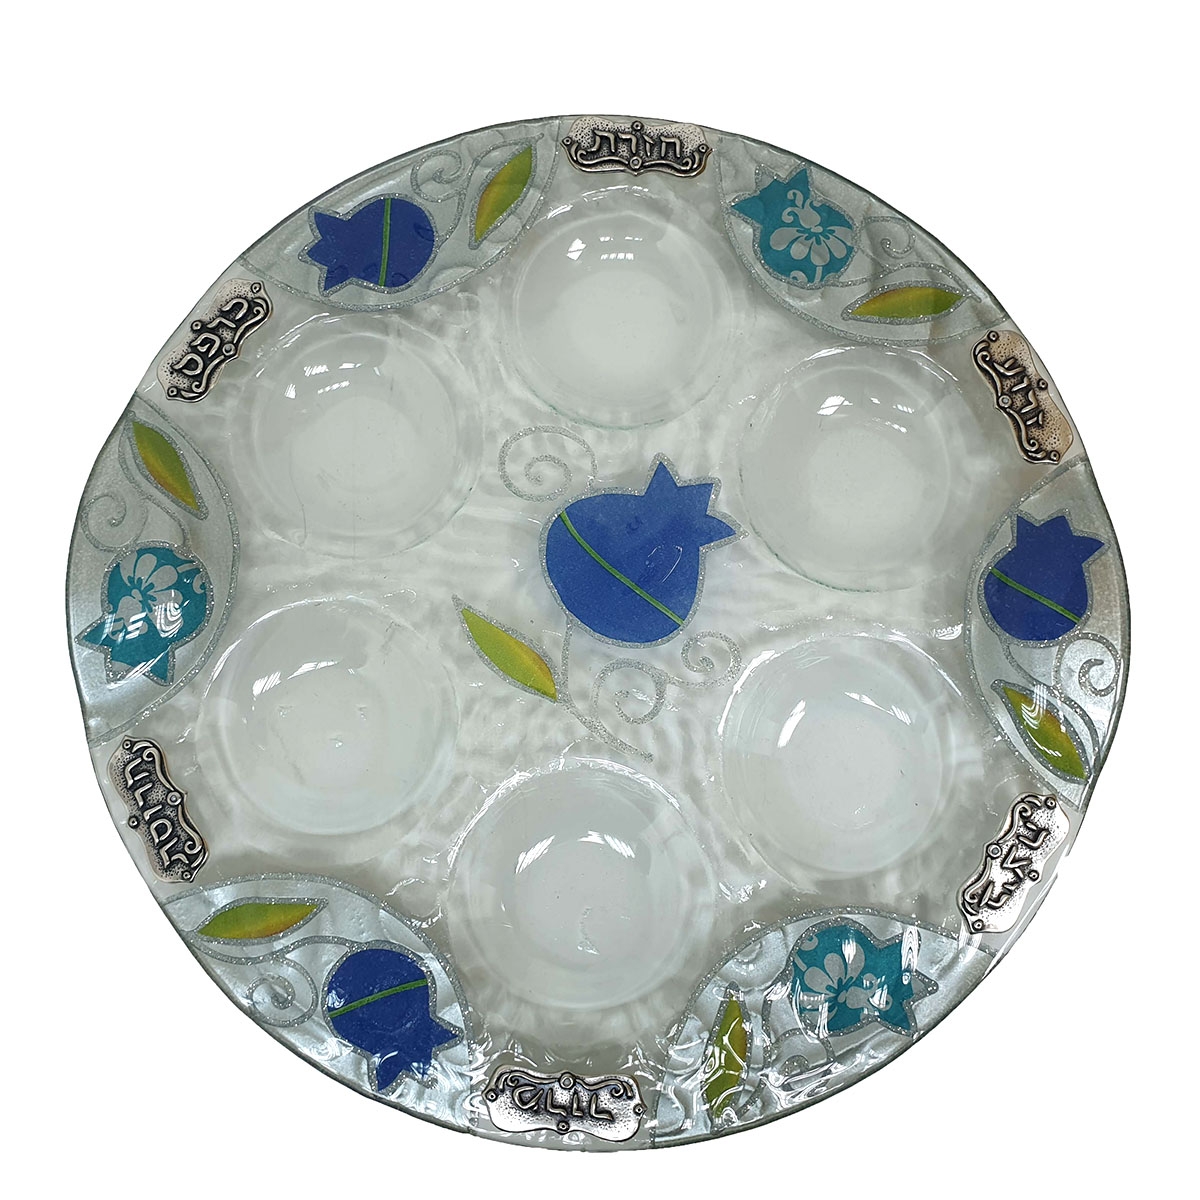 Lily Art Hand-Painted Glass Seder Plate With Pomegranate Design (Dark Blue) - 1